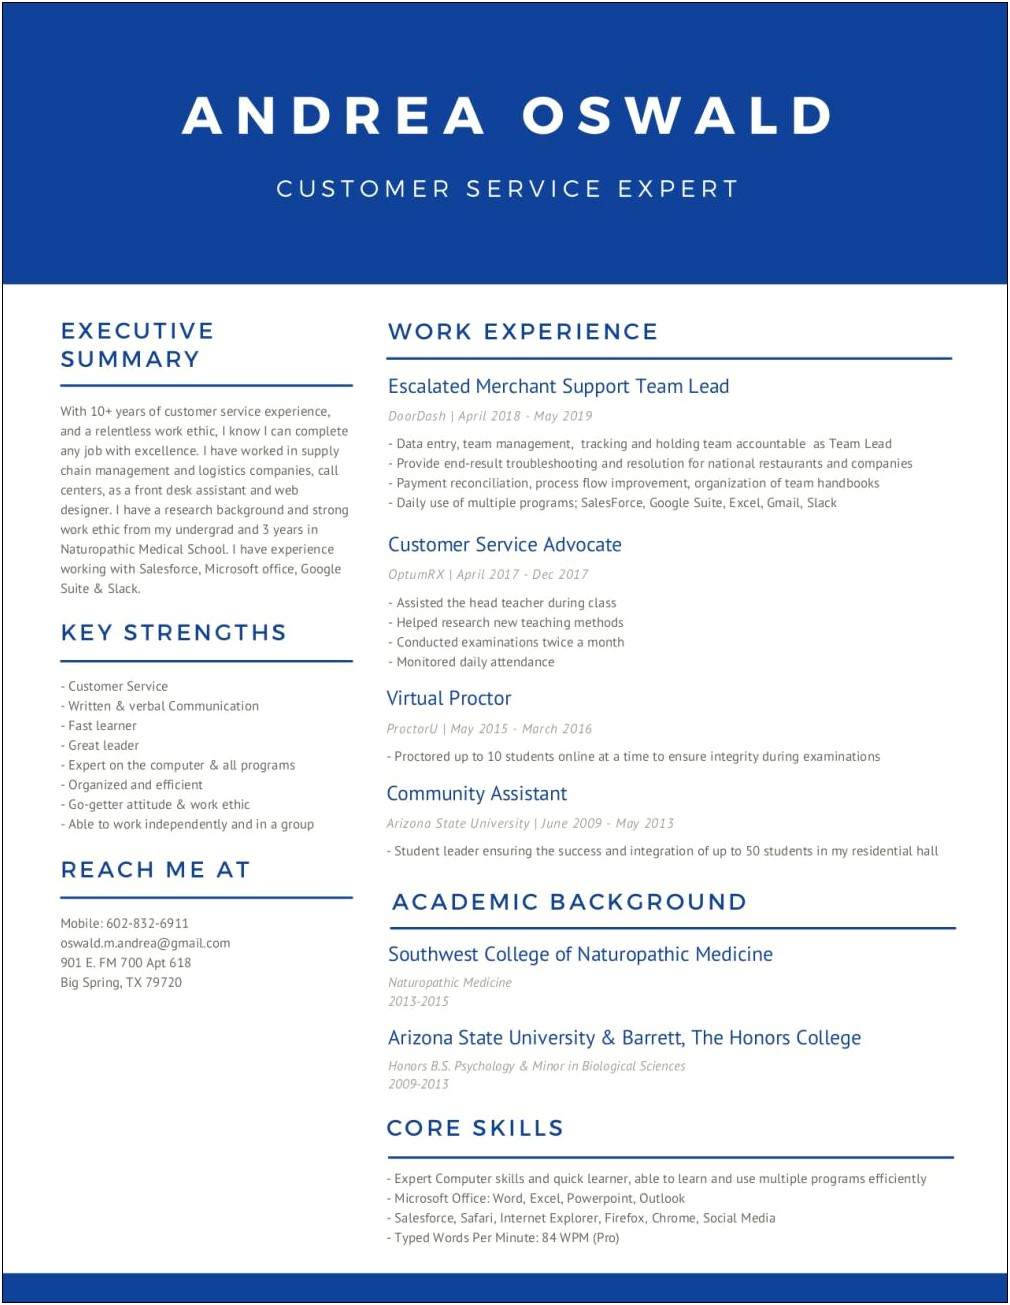 Words To Use For Customer Service Resume